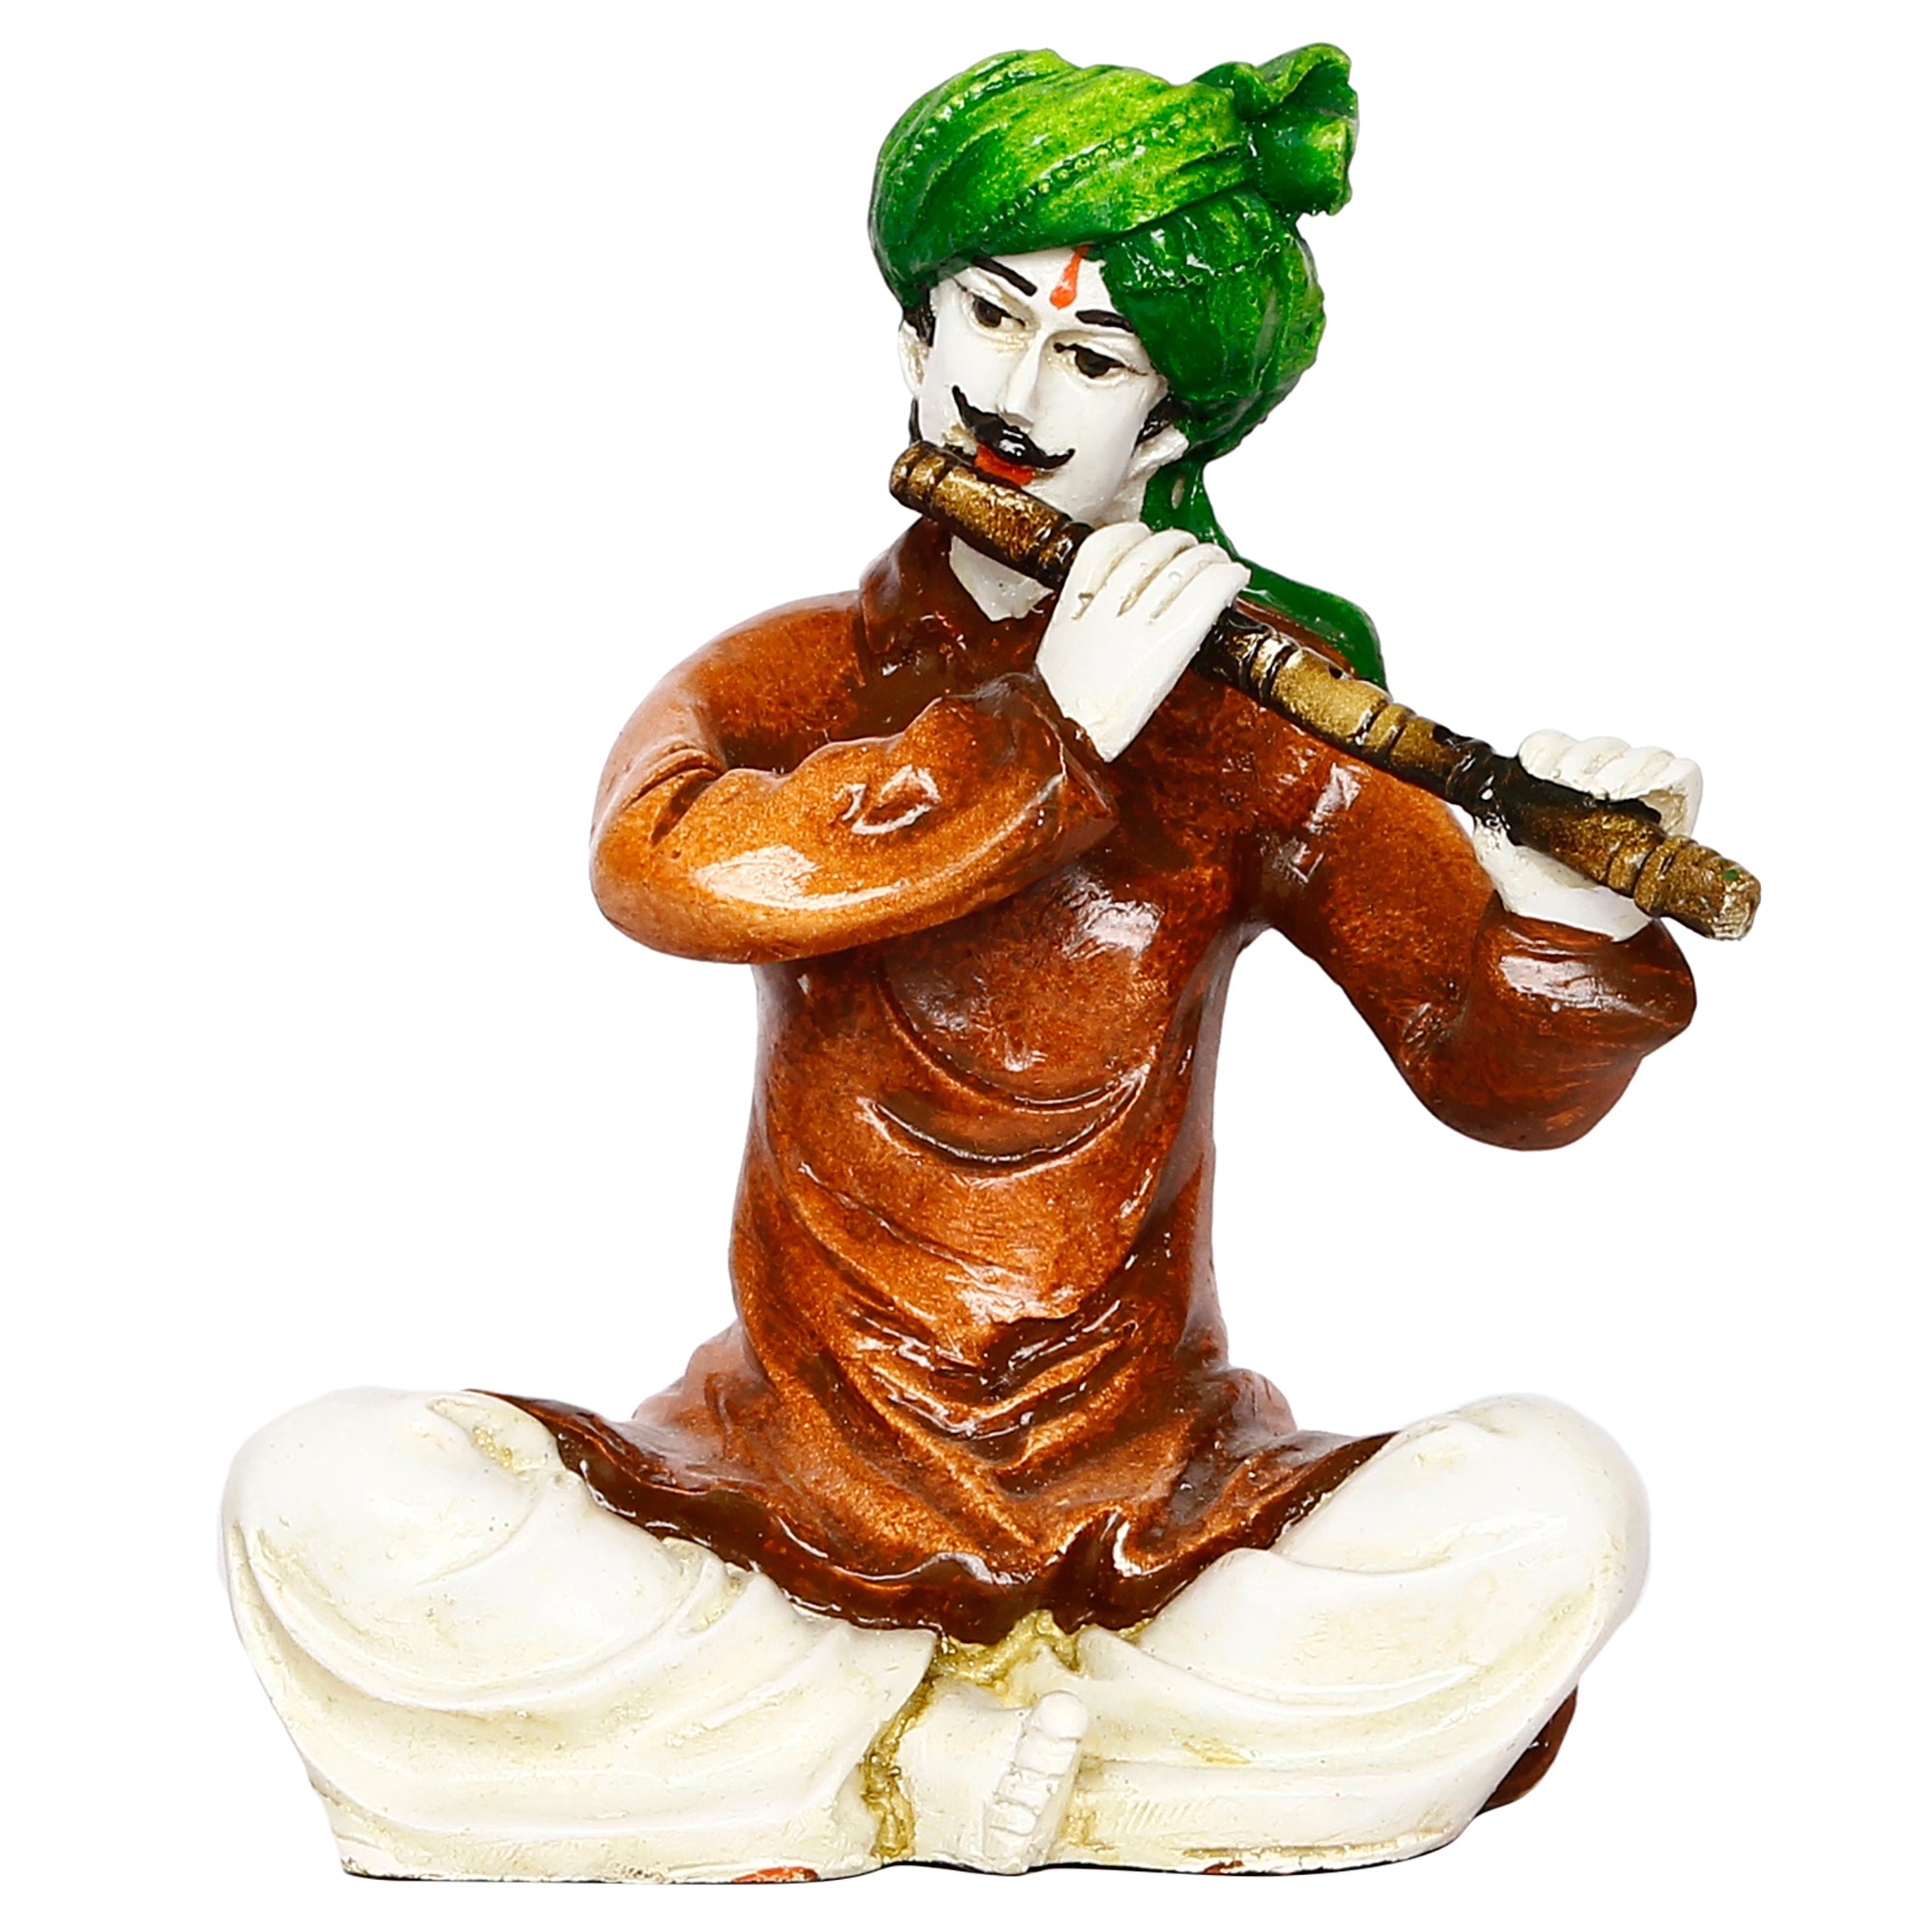 Polyresin Rajasthani Musician Men Statue Playing Flute Human Figurines Home Decor Showpiece 2